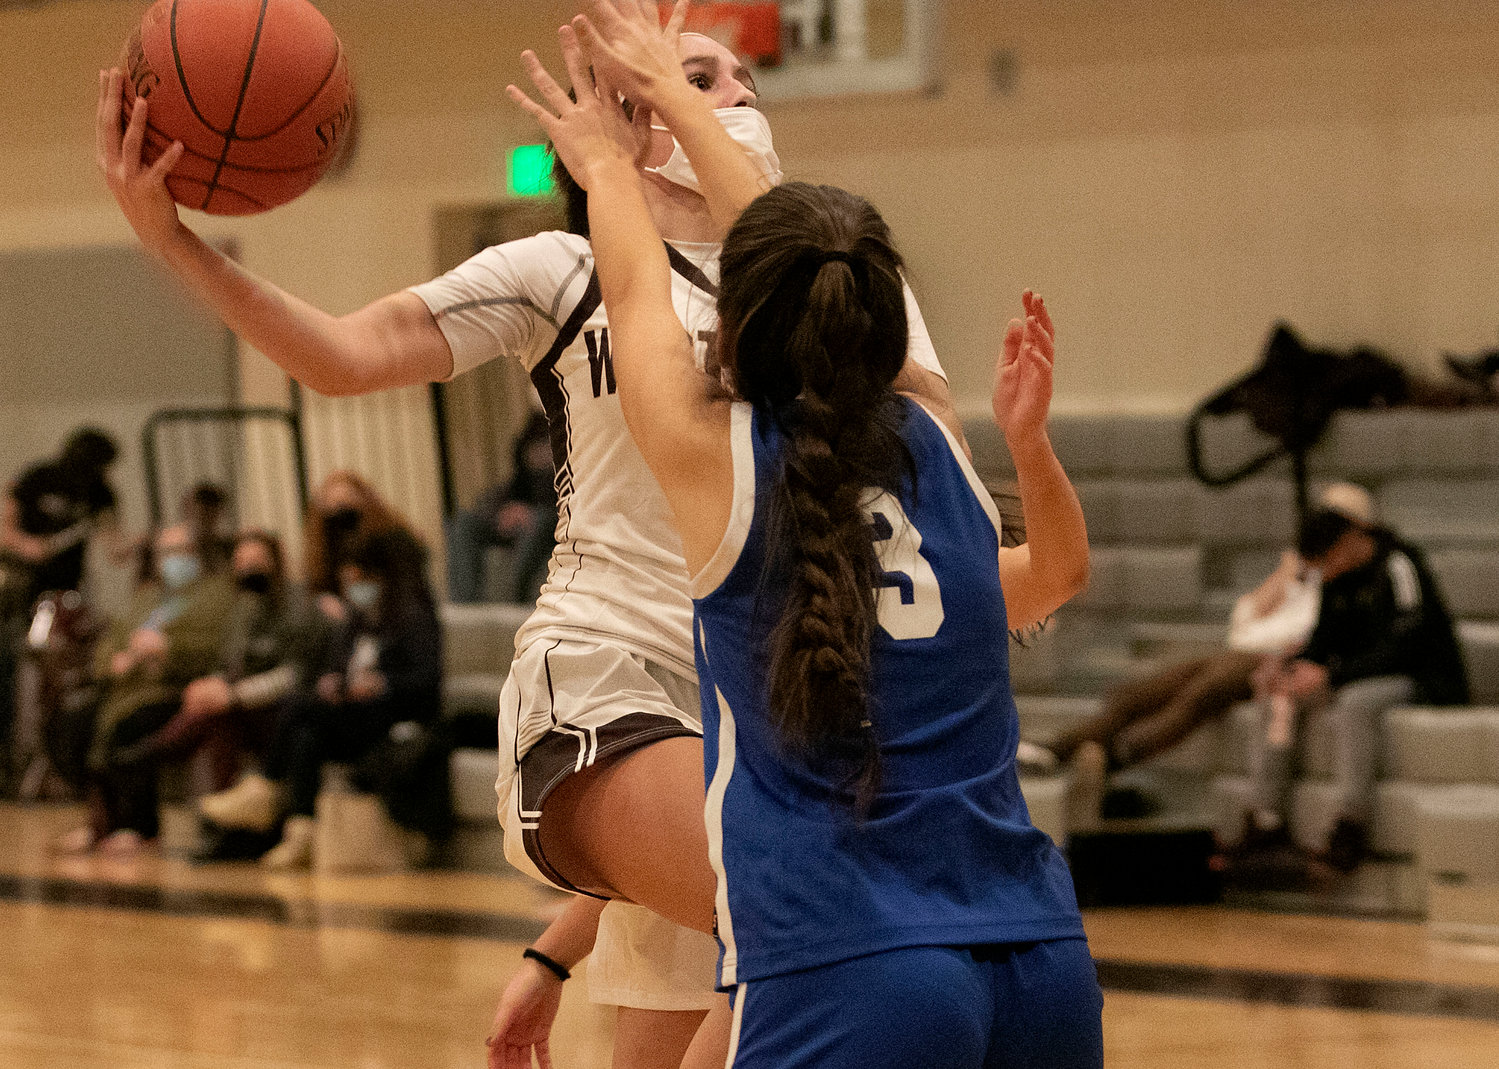 Junior guard and co-captain Leah Sylvain took control of the game early and scored 12 of her game high 17 points in the first half. “Leah is our leader out there. She is definitely the engine behind our offense,” said Wildcats head coach Jen Gargiulo.